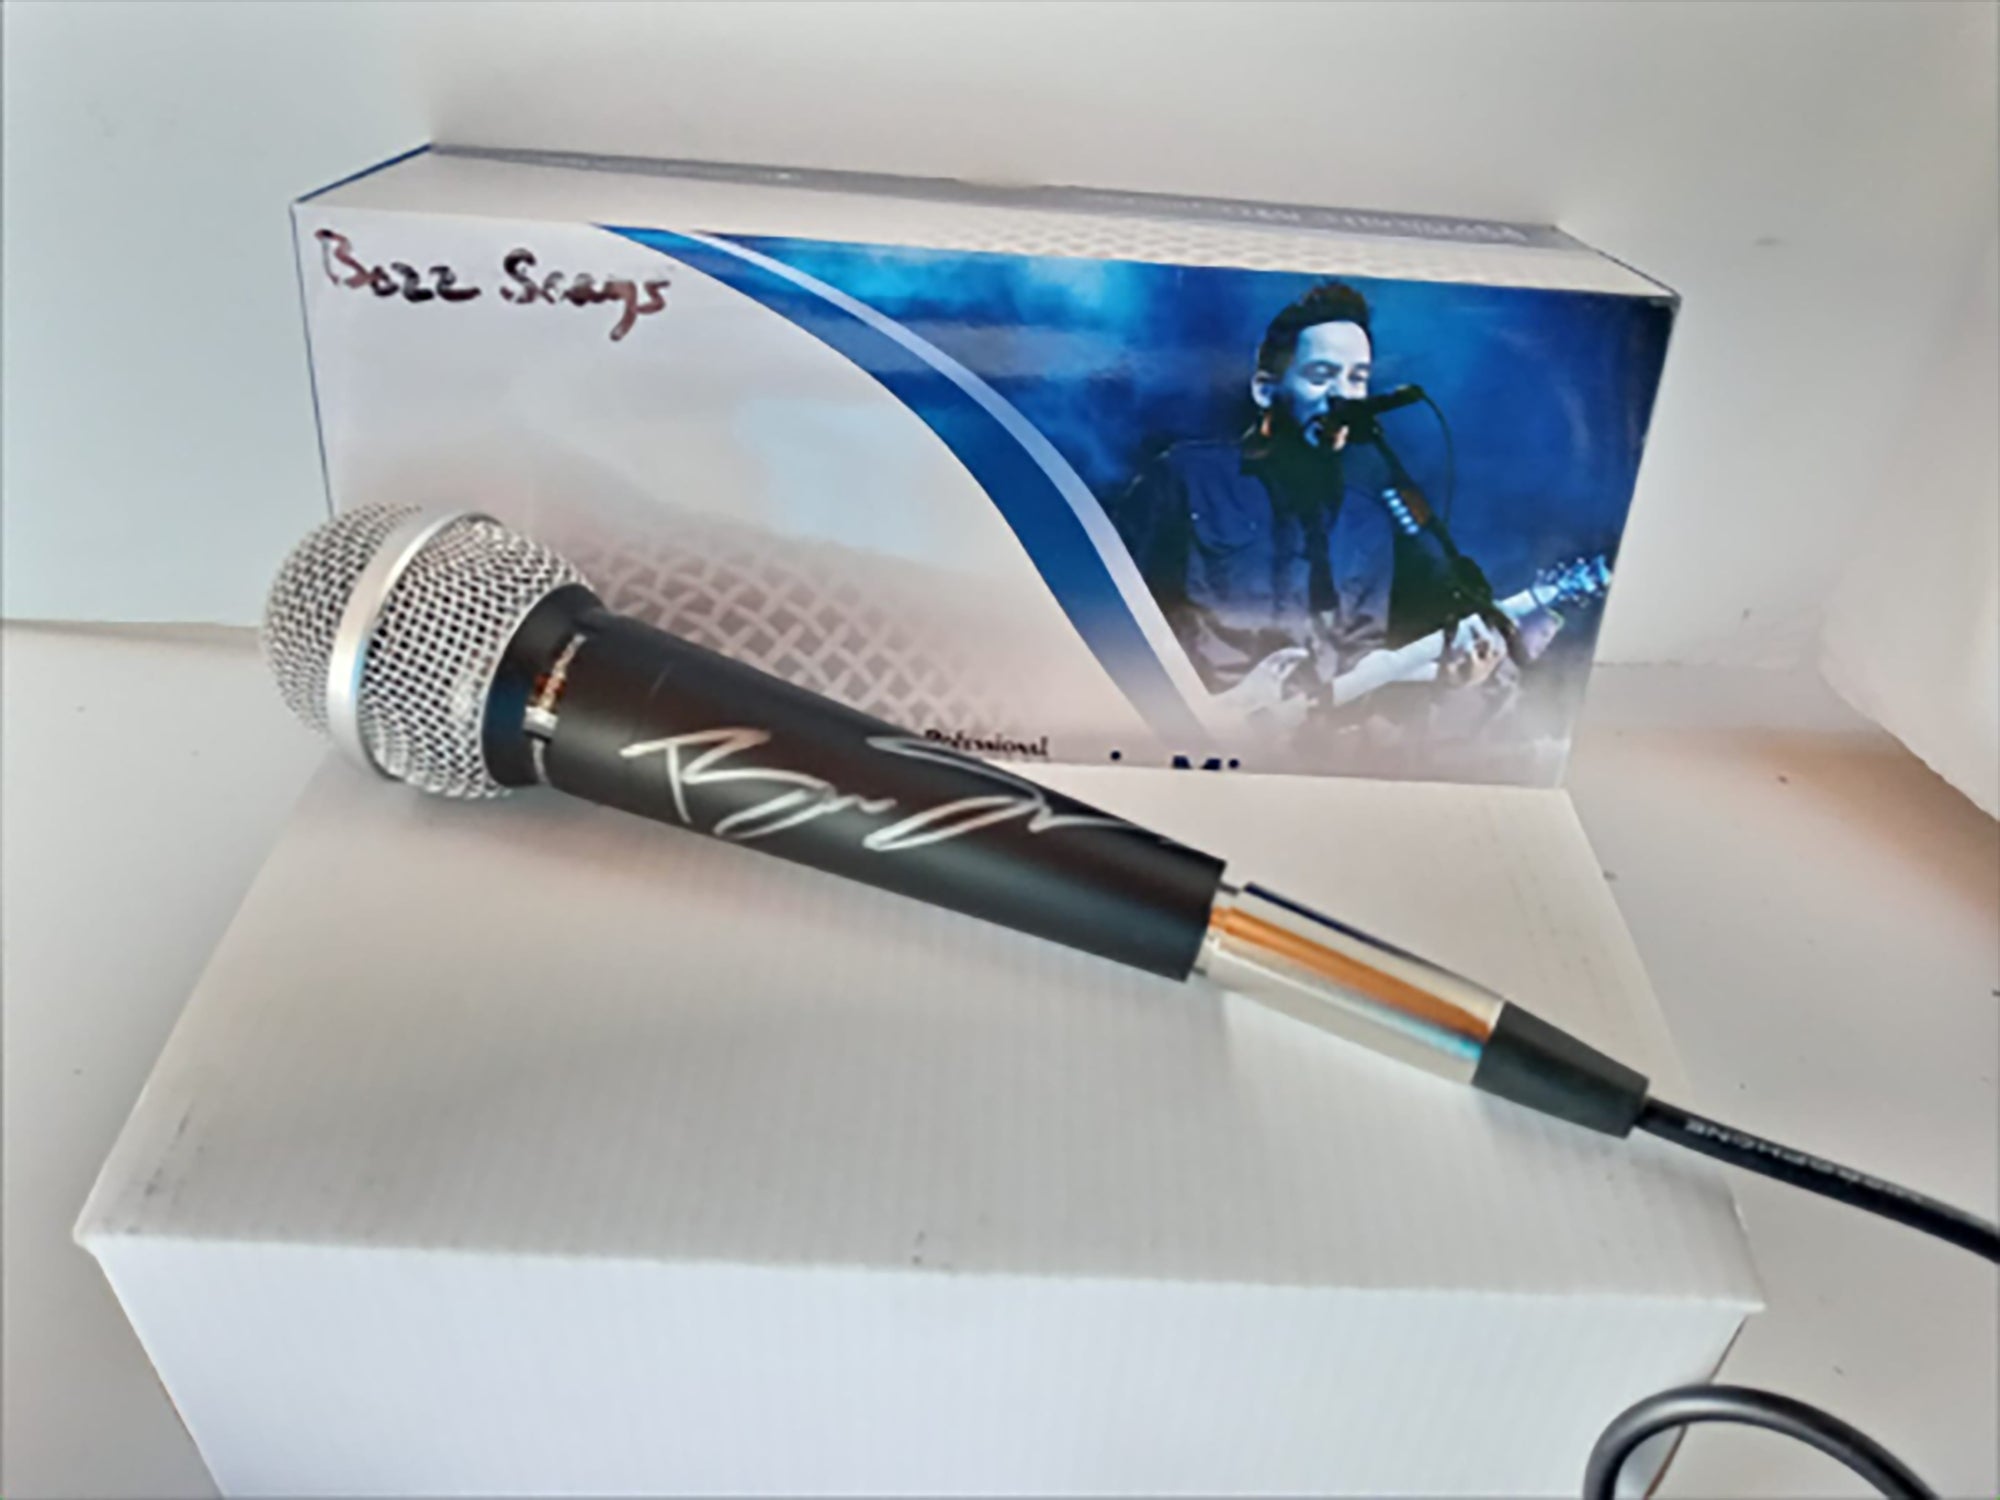 Bozz Scaggs signed microphone with proof